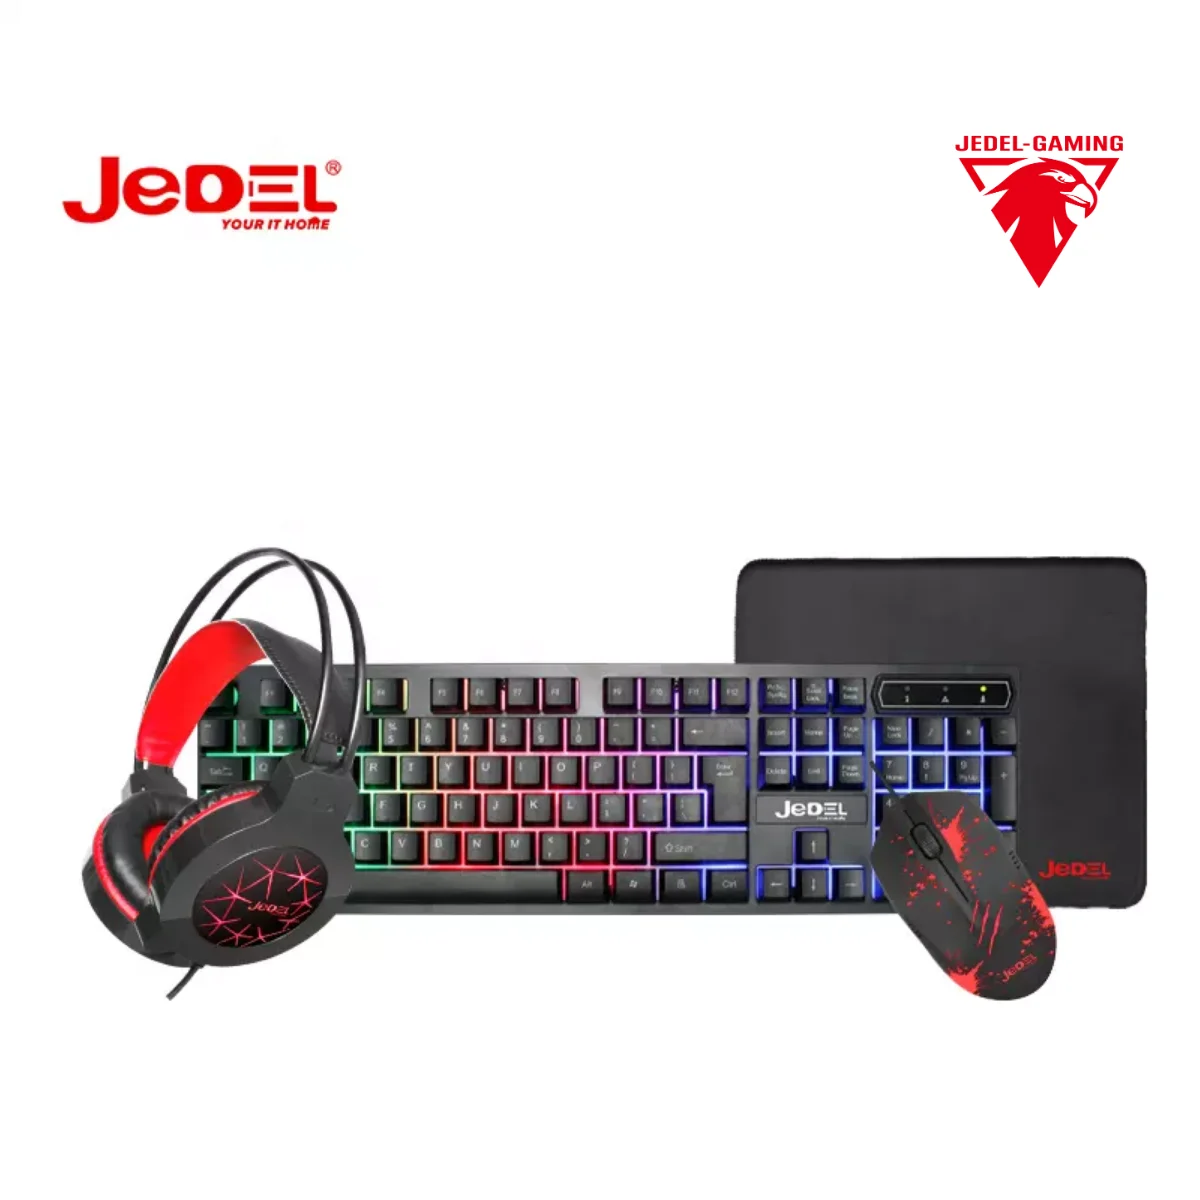 Jedel Gaming Set 4 In 1 Gift Box Rgb Gaming Keyboard Mouse Headset And Mousepad Combos With Cheap Price Gaming Pc Set Combo Buy Hot Selling Wired Gaming Mouse Combos Led